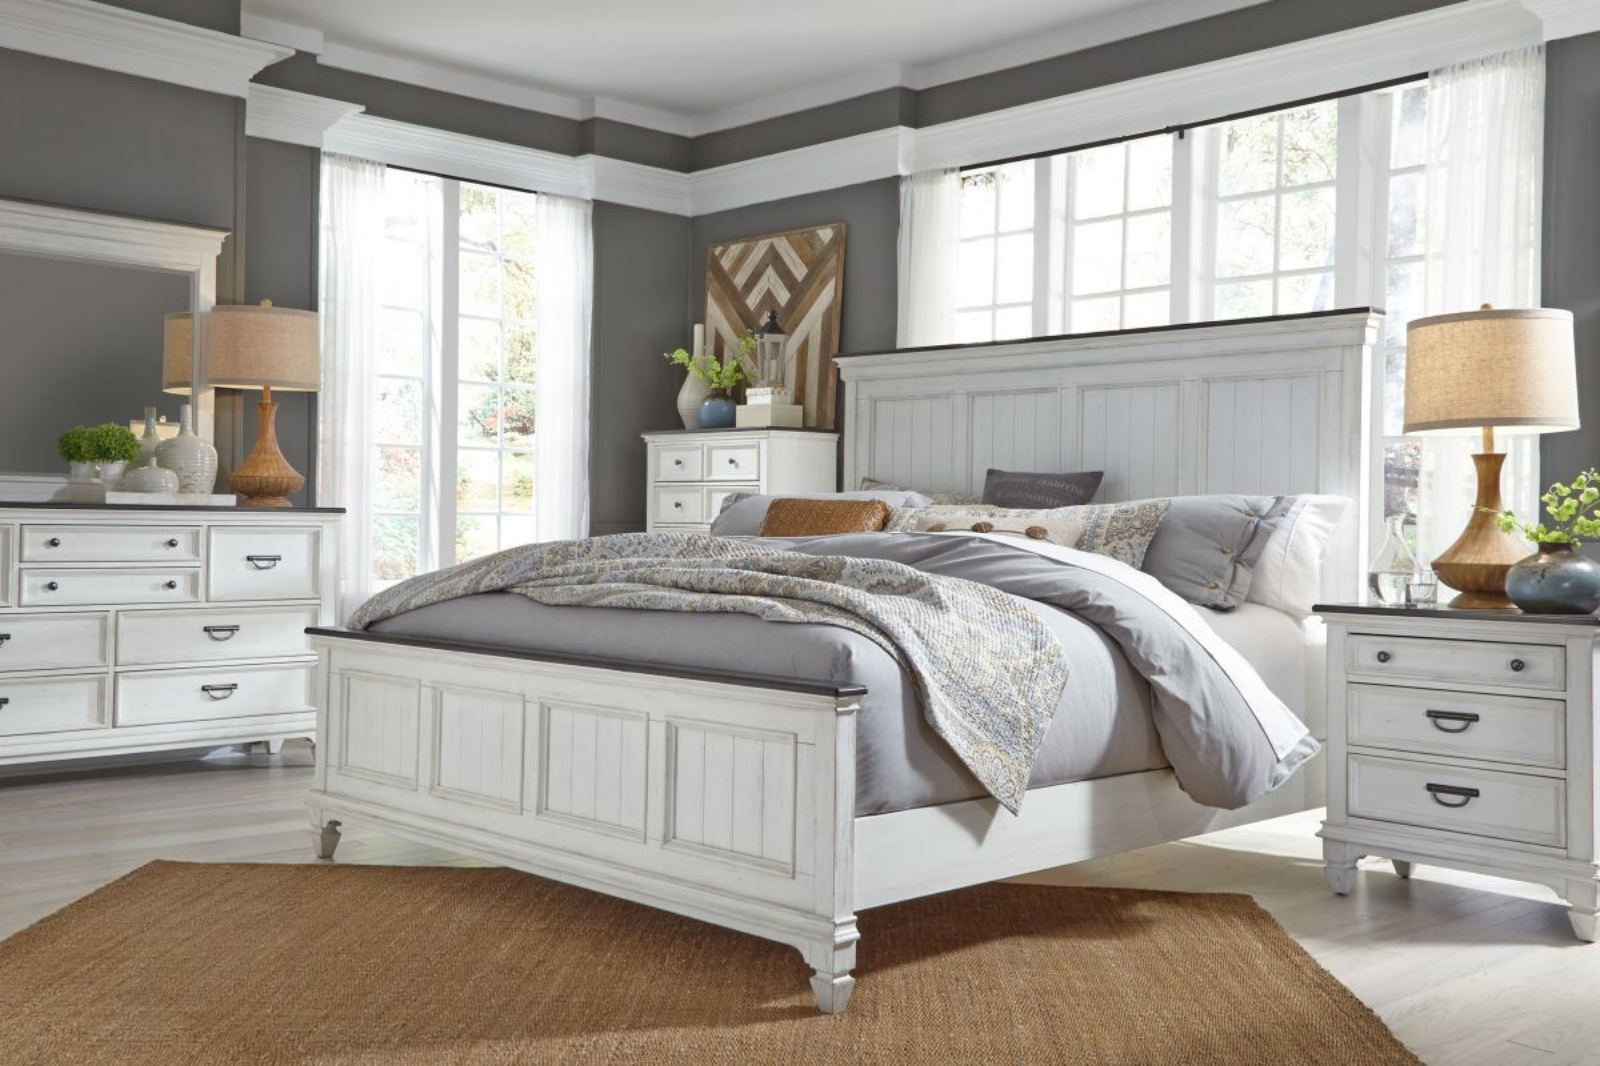 Picture of Allyson Park 5 Piece Queen Bedroom Group